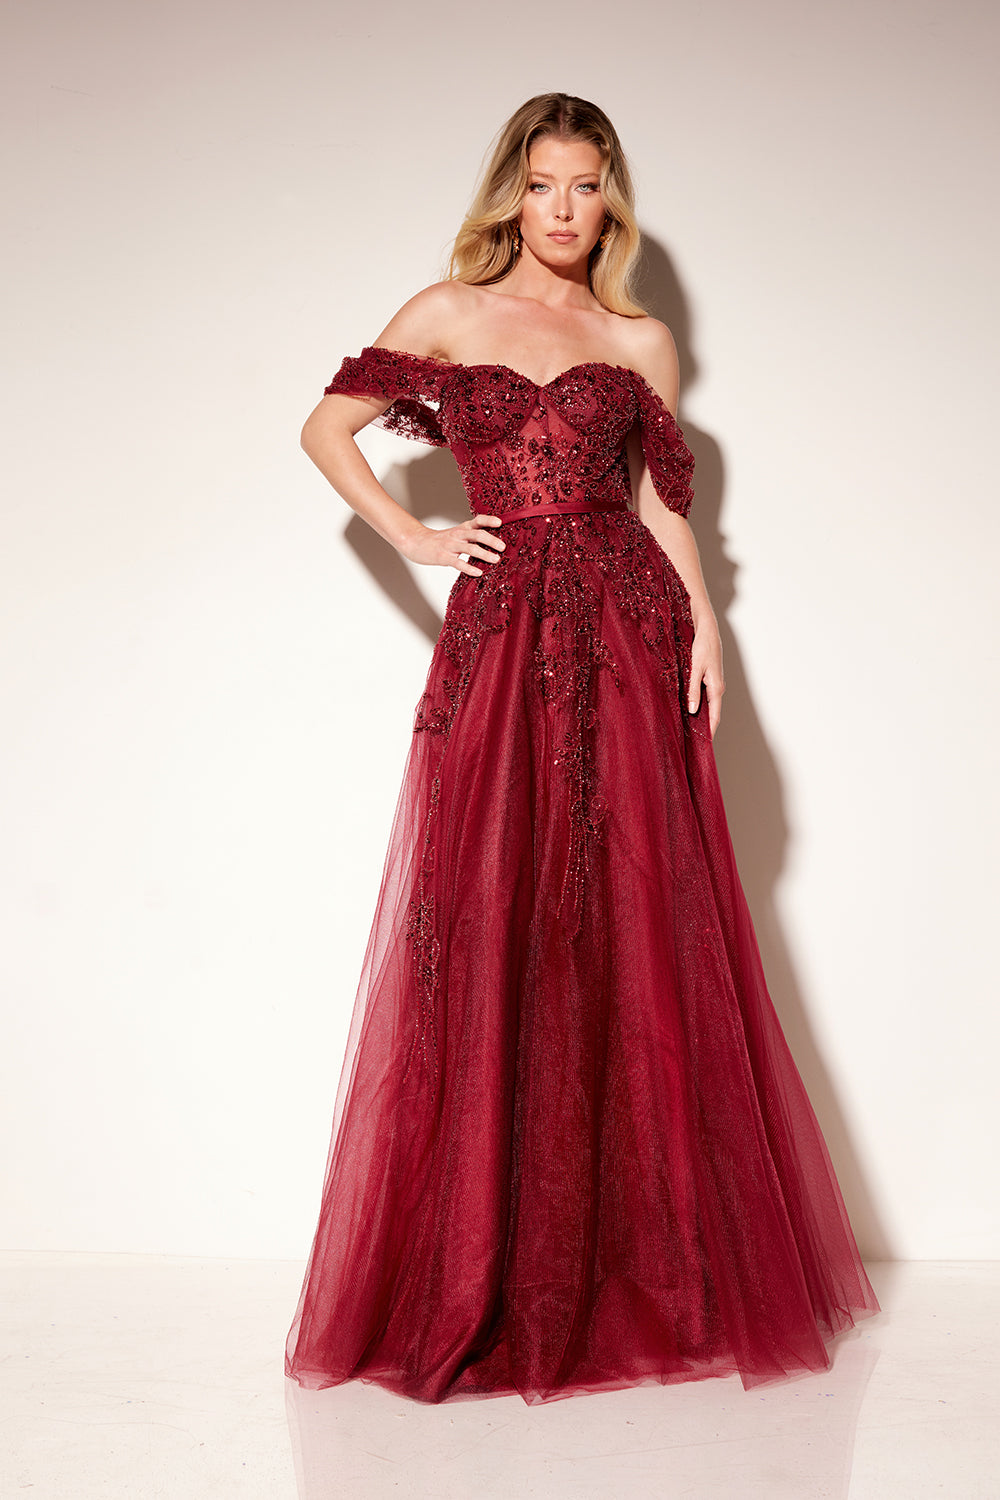 Lucci-Lu-1309-Sweetheart-Neckline-Zipper-Back-Sweep-Train-Embroidered-Tulle-A-Line-Burgundy-Evening-Dress-B-Chic-Fashions-Prom-Dress